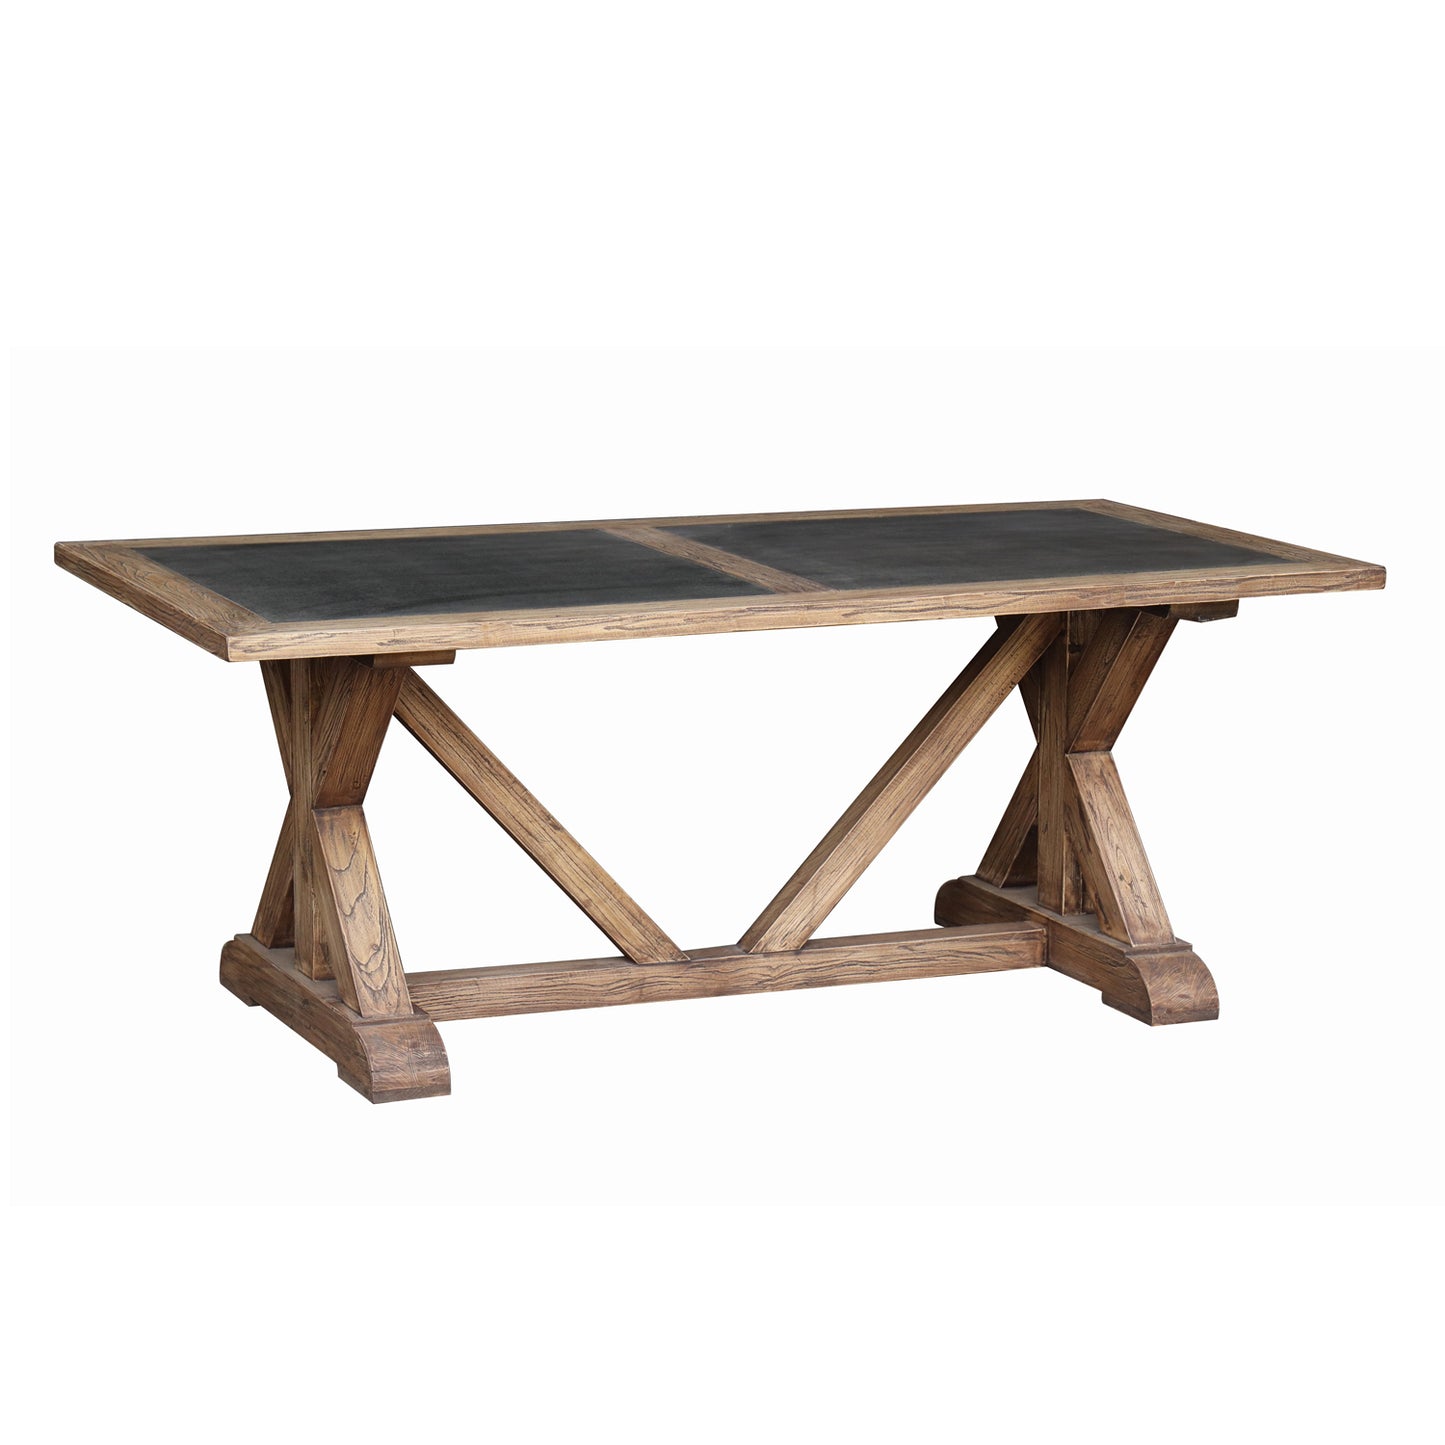 Lambs Green - Old Elm & Zinc Dining Table